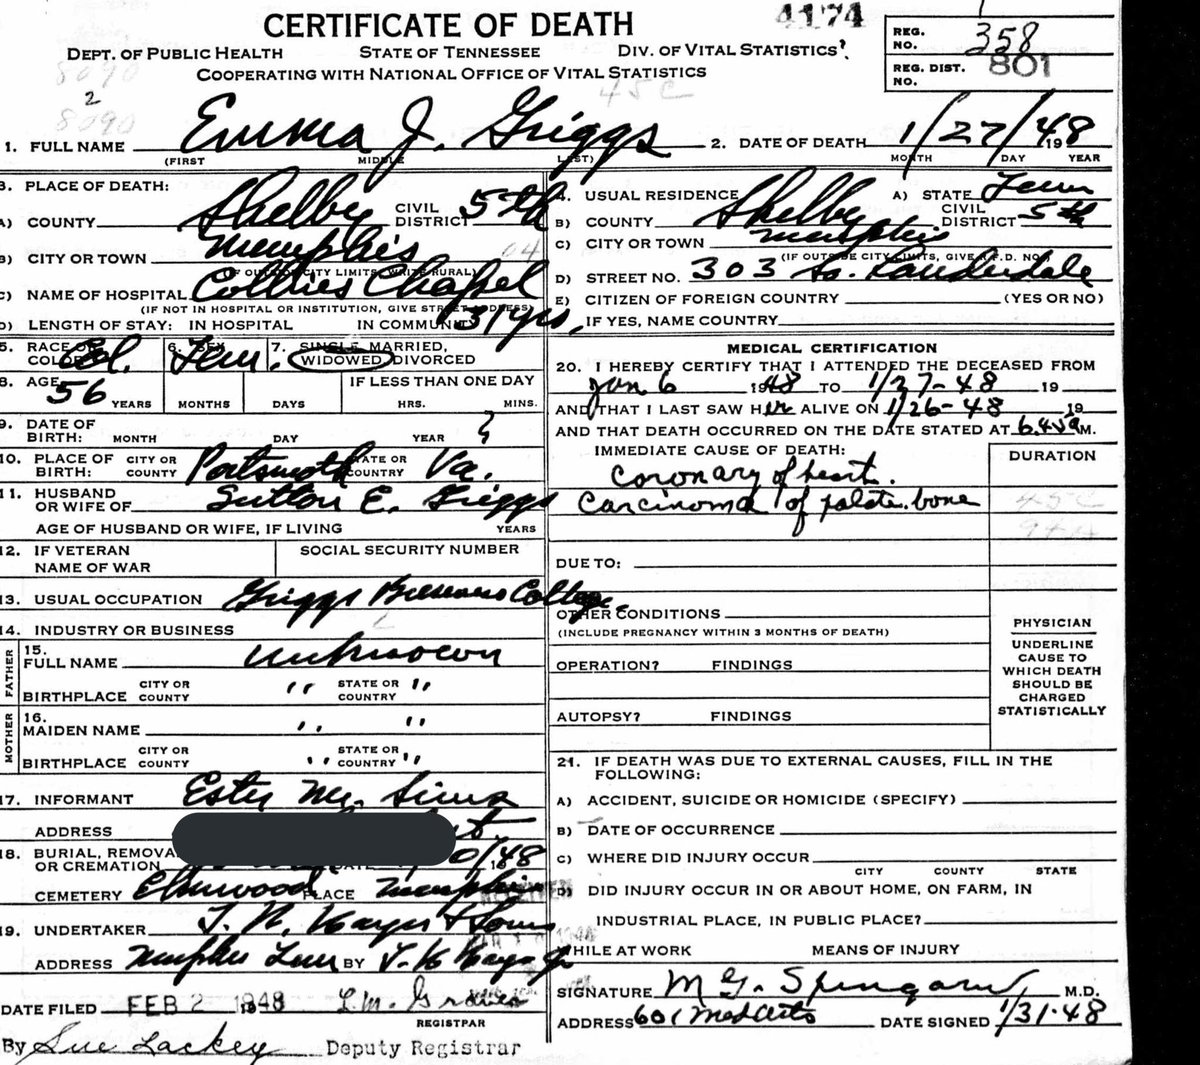 She started Griggs Business College in Memphis, TN, a practical arts and business institution. My. God. I had to know more!  @Ancestry to the rescue. I searched their archives and found her death certificate...If you zoom in on her occupation...it lists her school.